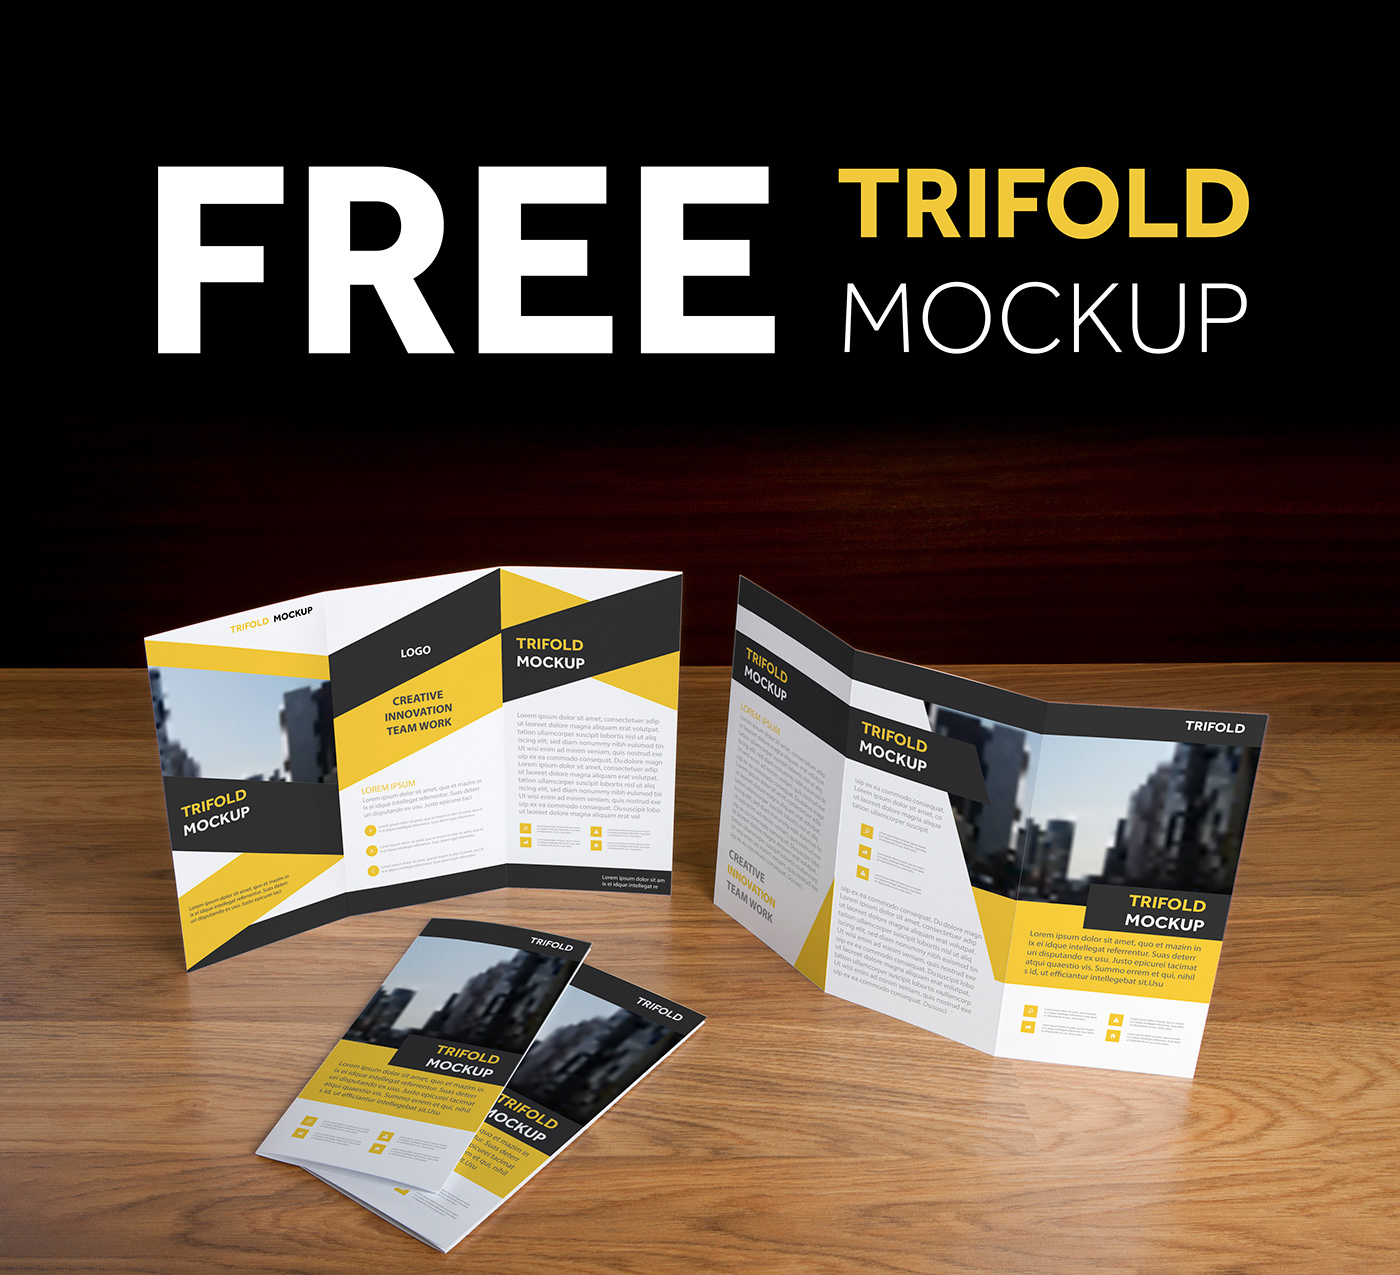 Mockup mock-up free psd template layers trifold design photoshop high quality